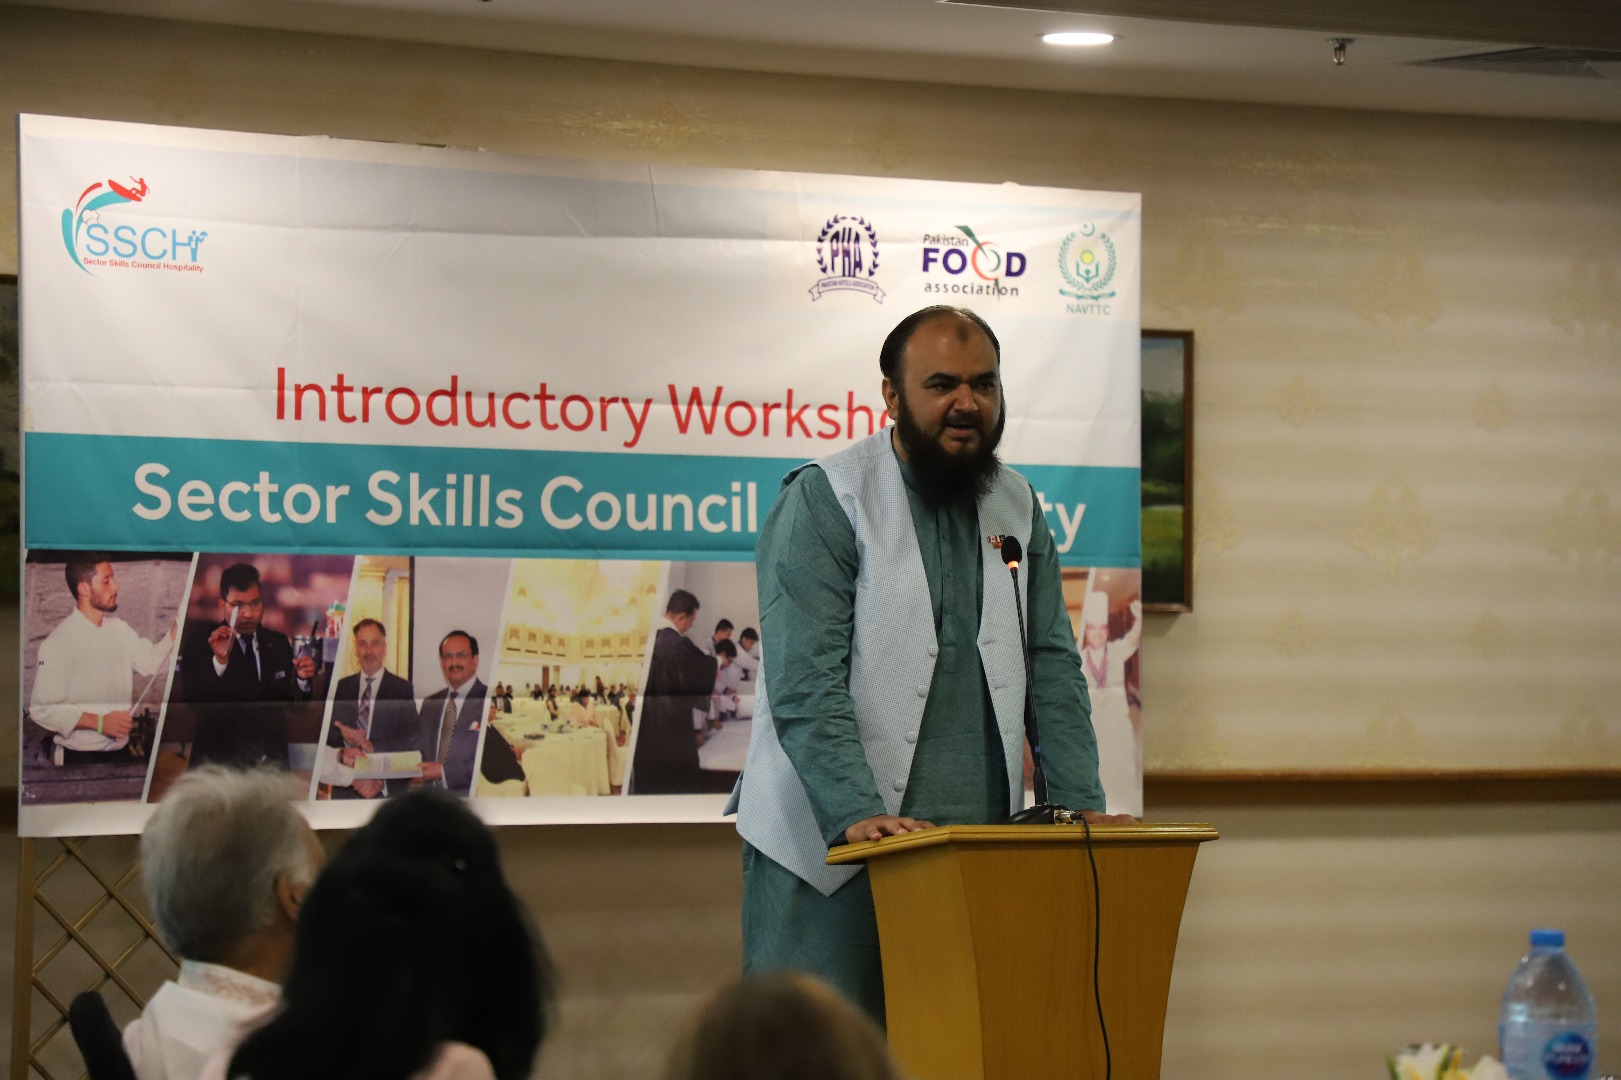 Workshop of Sector Skill Council Hospitality held on 17-05-2018 at Karachi Marriott Hotel